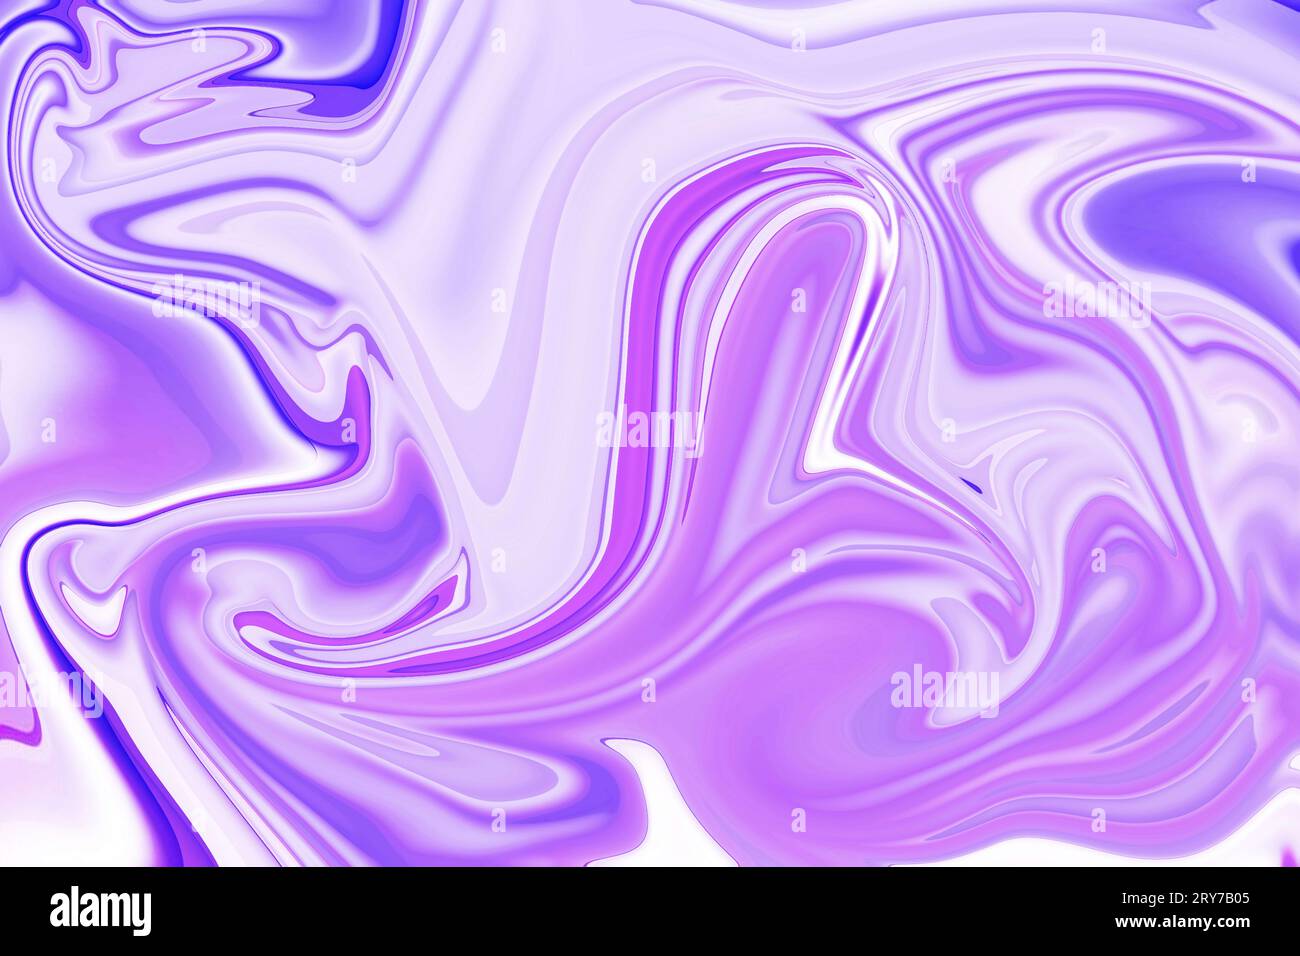 transcending boundaries with vibrant marble texture in violet and lilac ...